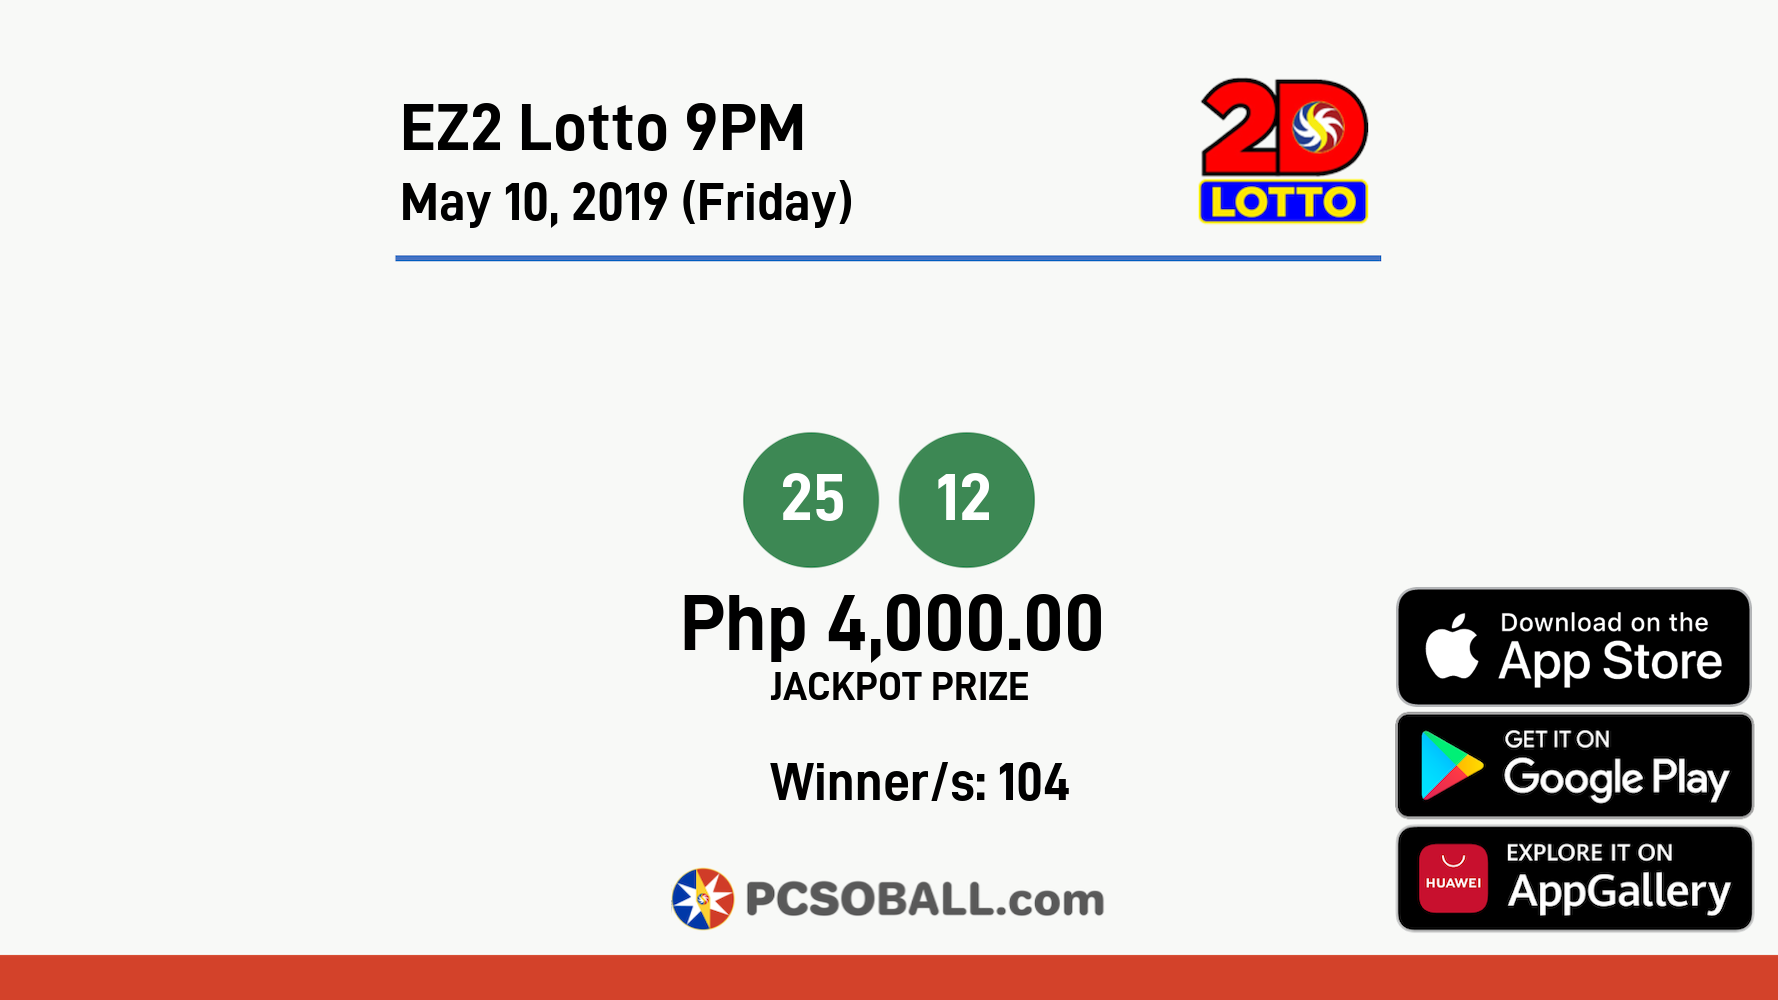 EZ2 Lotto 9PM May 10, 2019 (Friday) Result